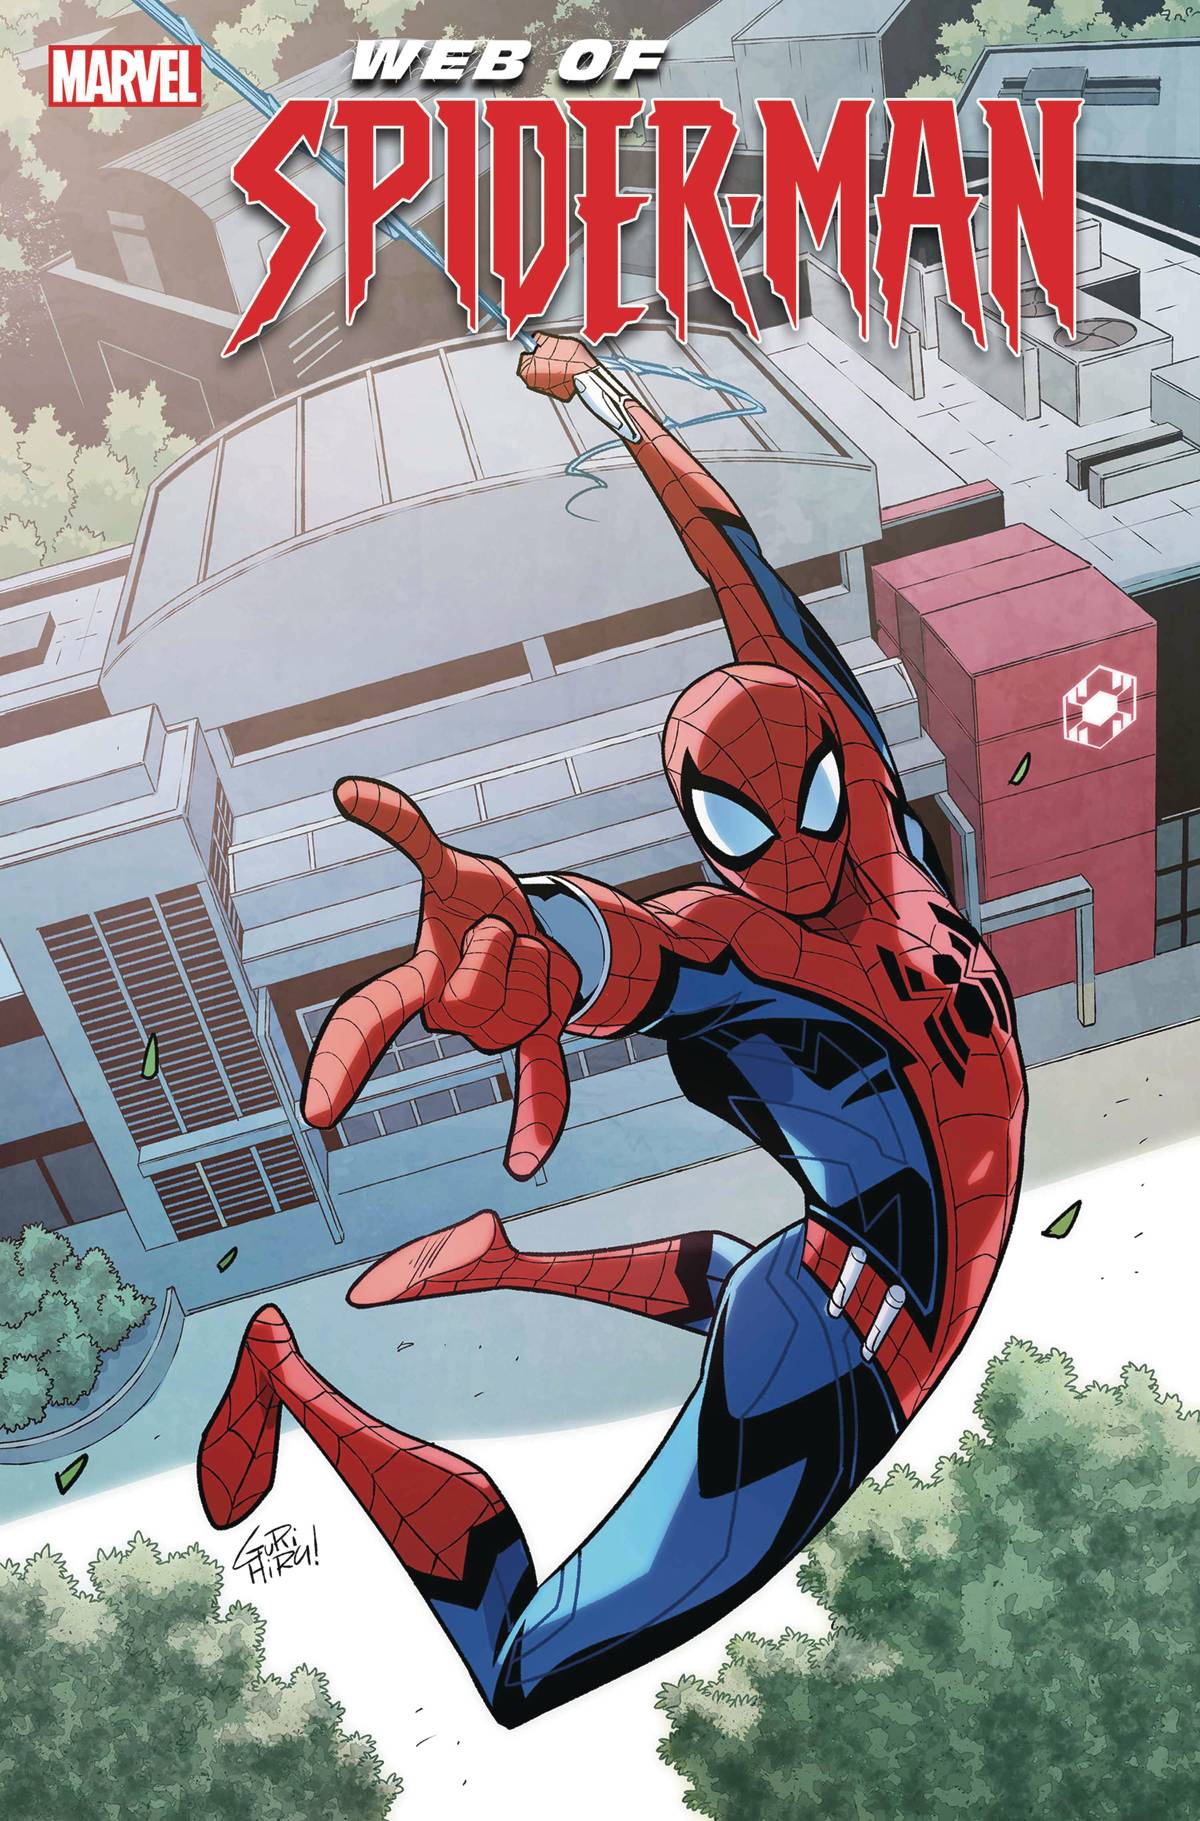 APR201123 - WEB OF SPIDER-MAN #1 POSTER - Previews World